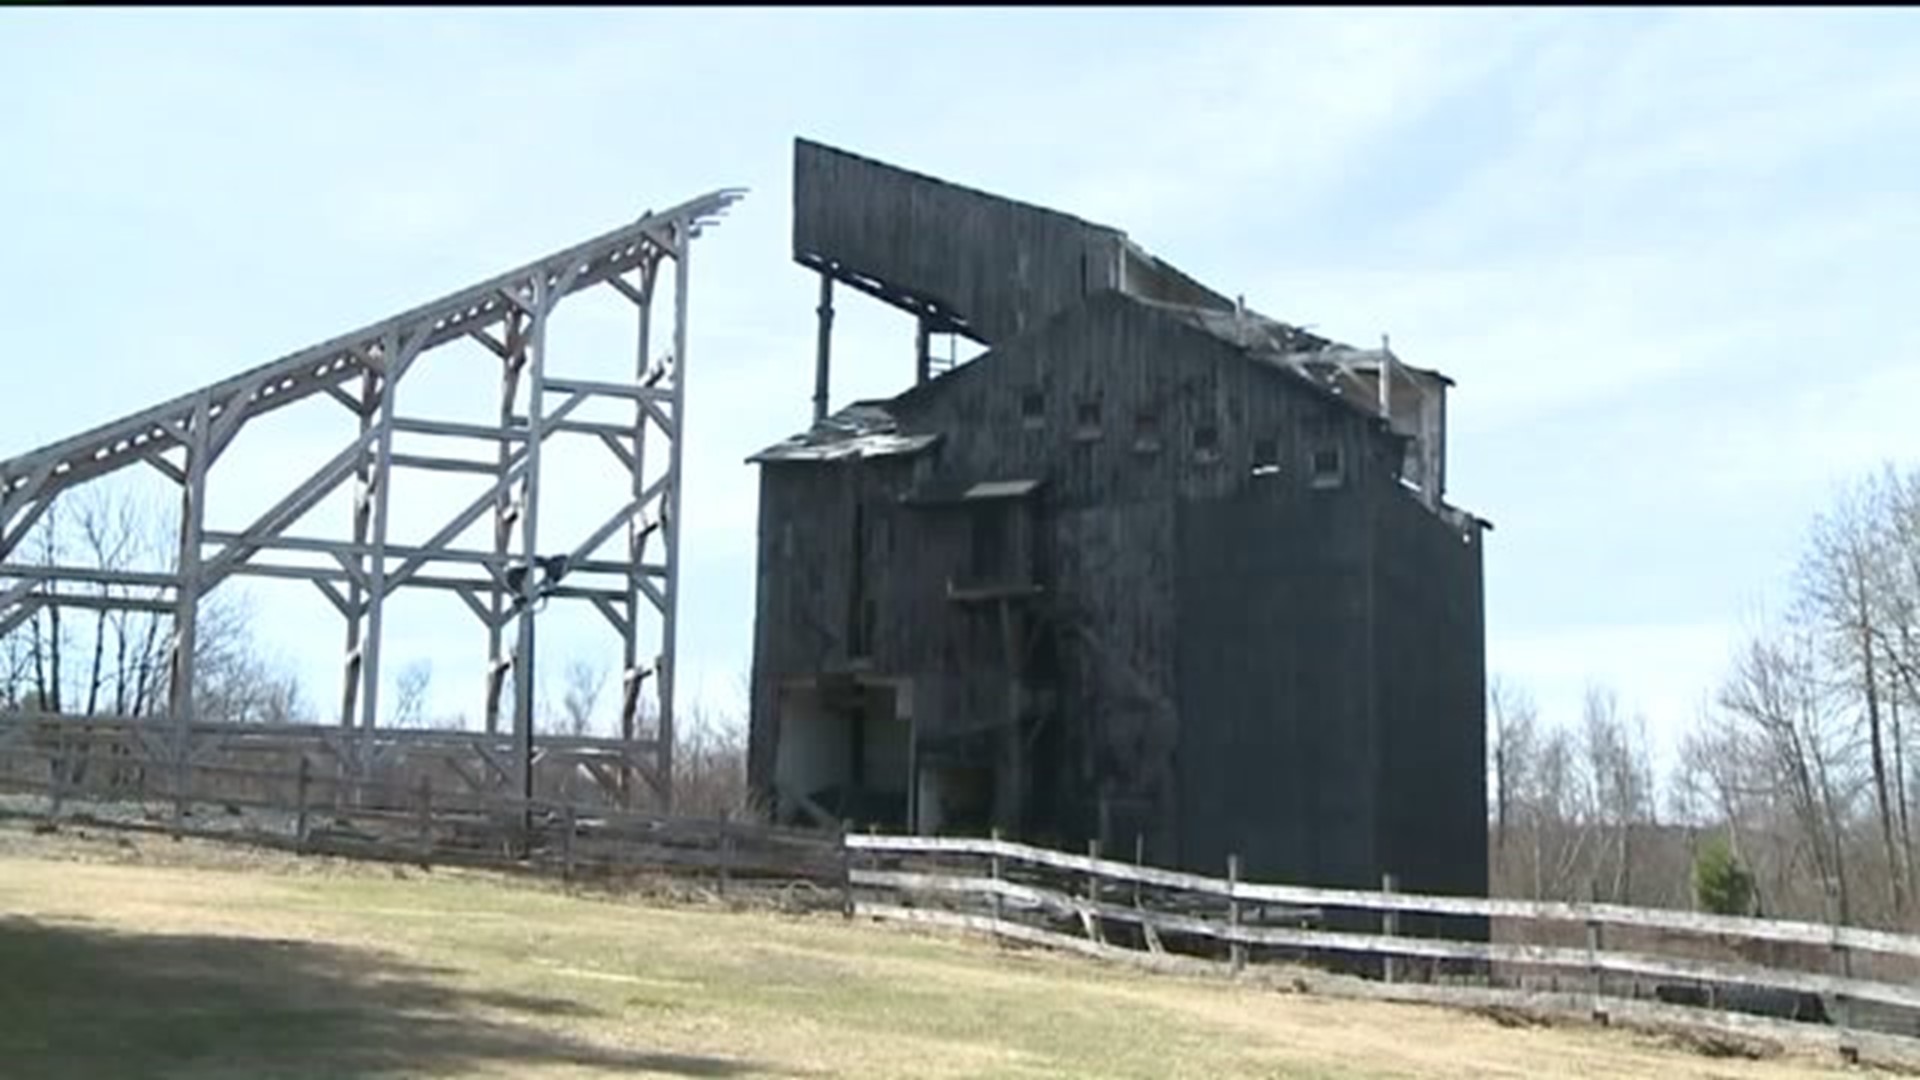 Trying to Keep Coal Mining History Alive